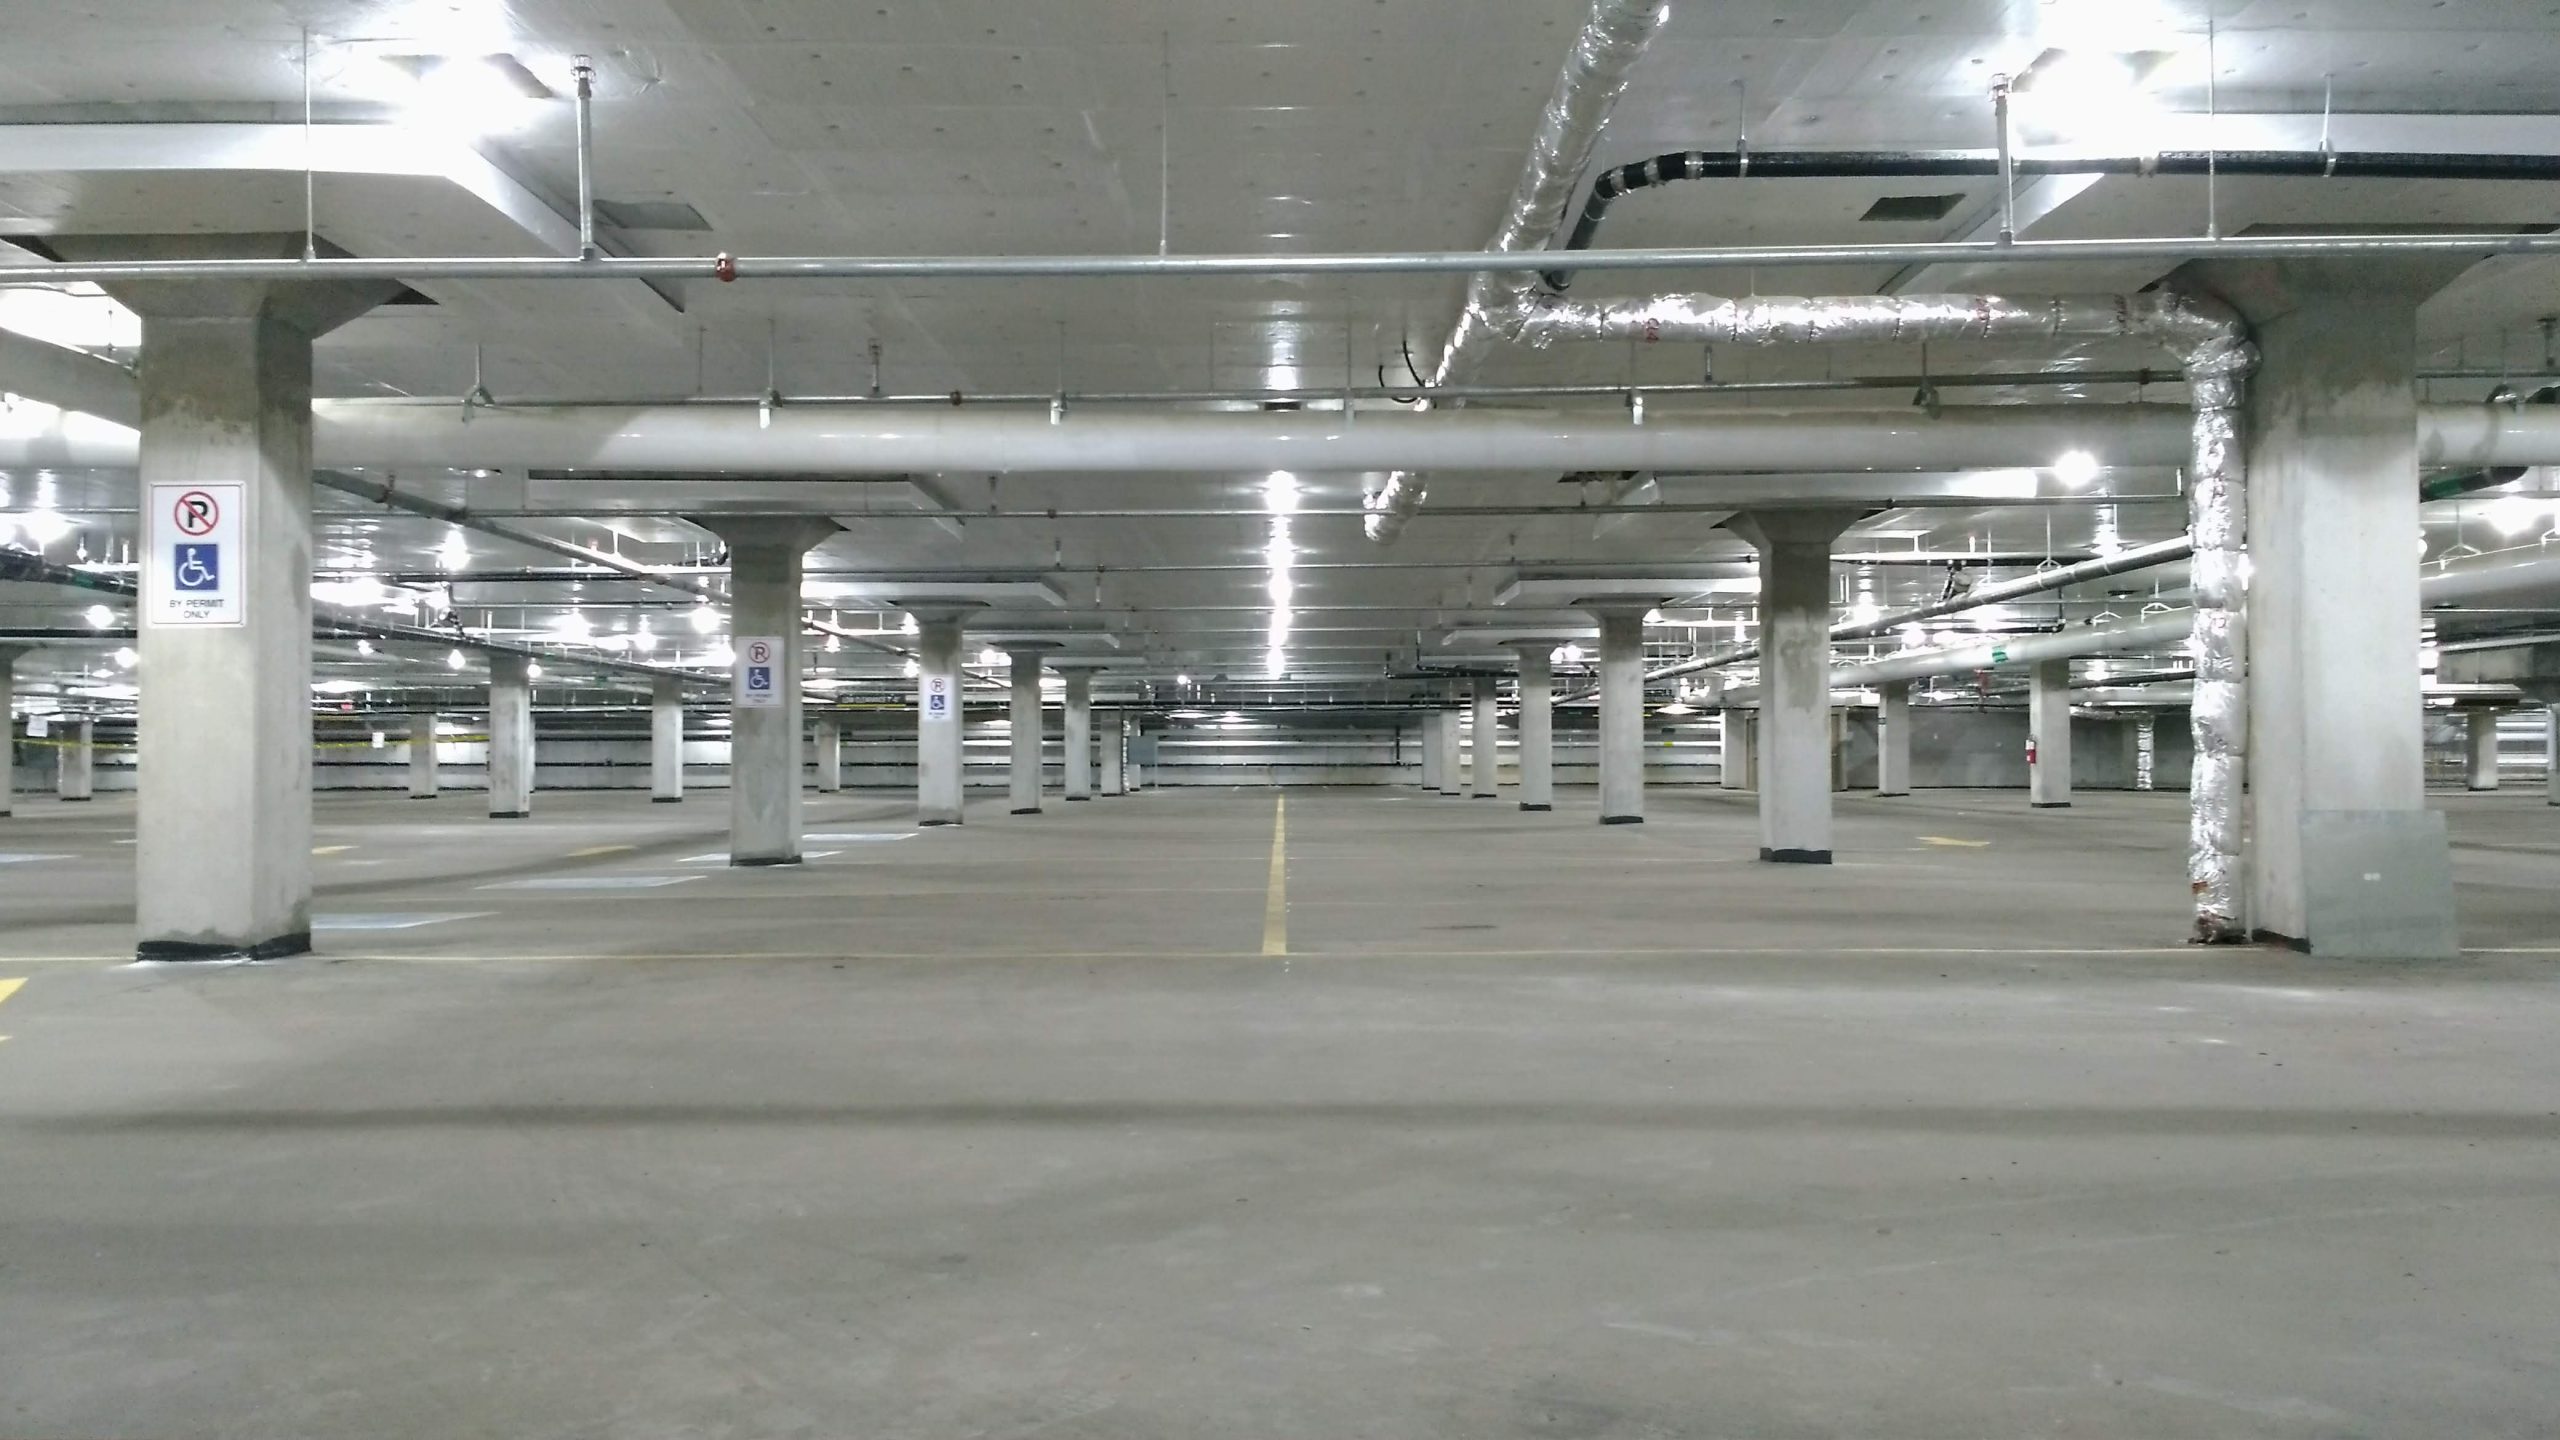 An image of an indoor parking garage with no cars and multiple lines of square columns.